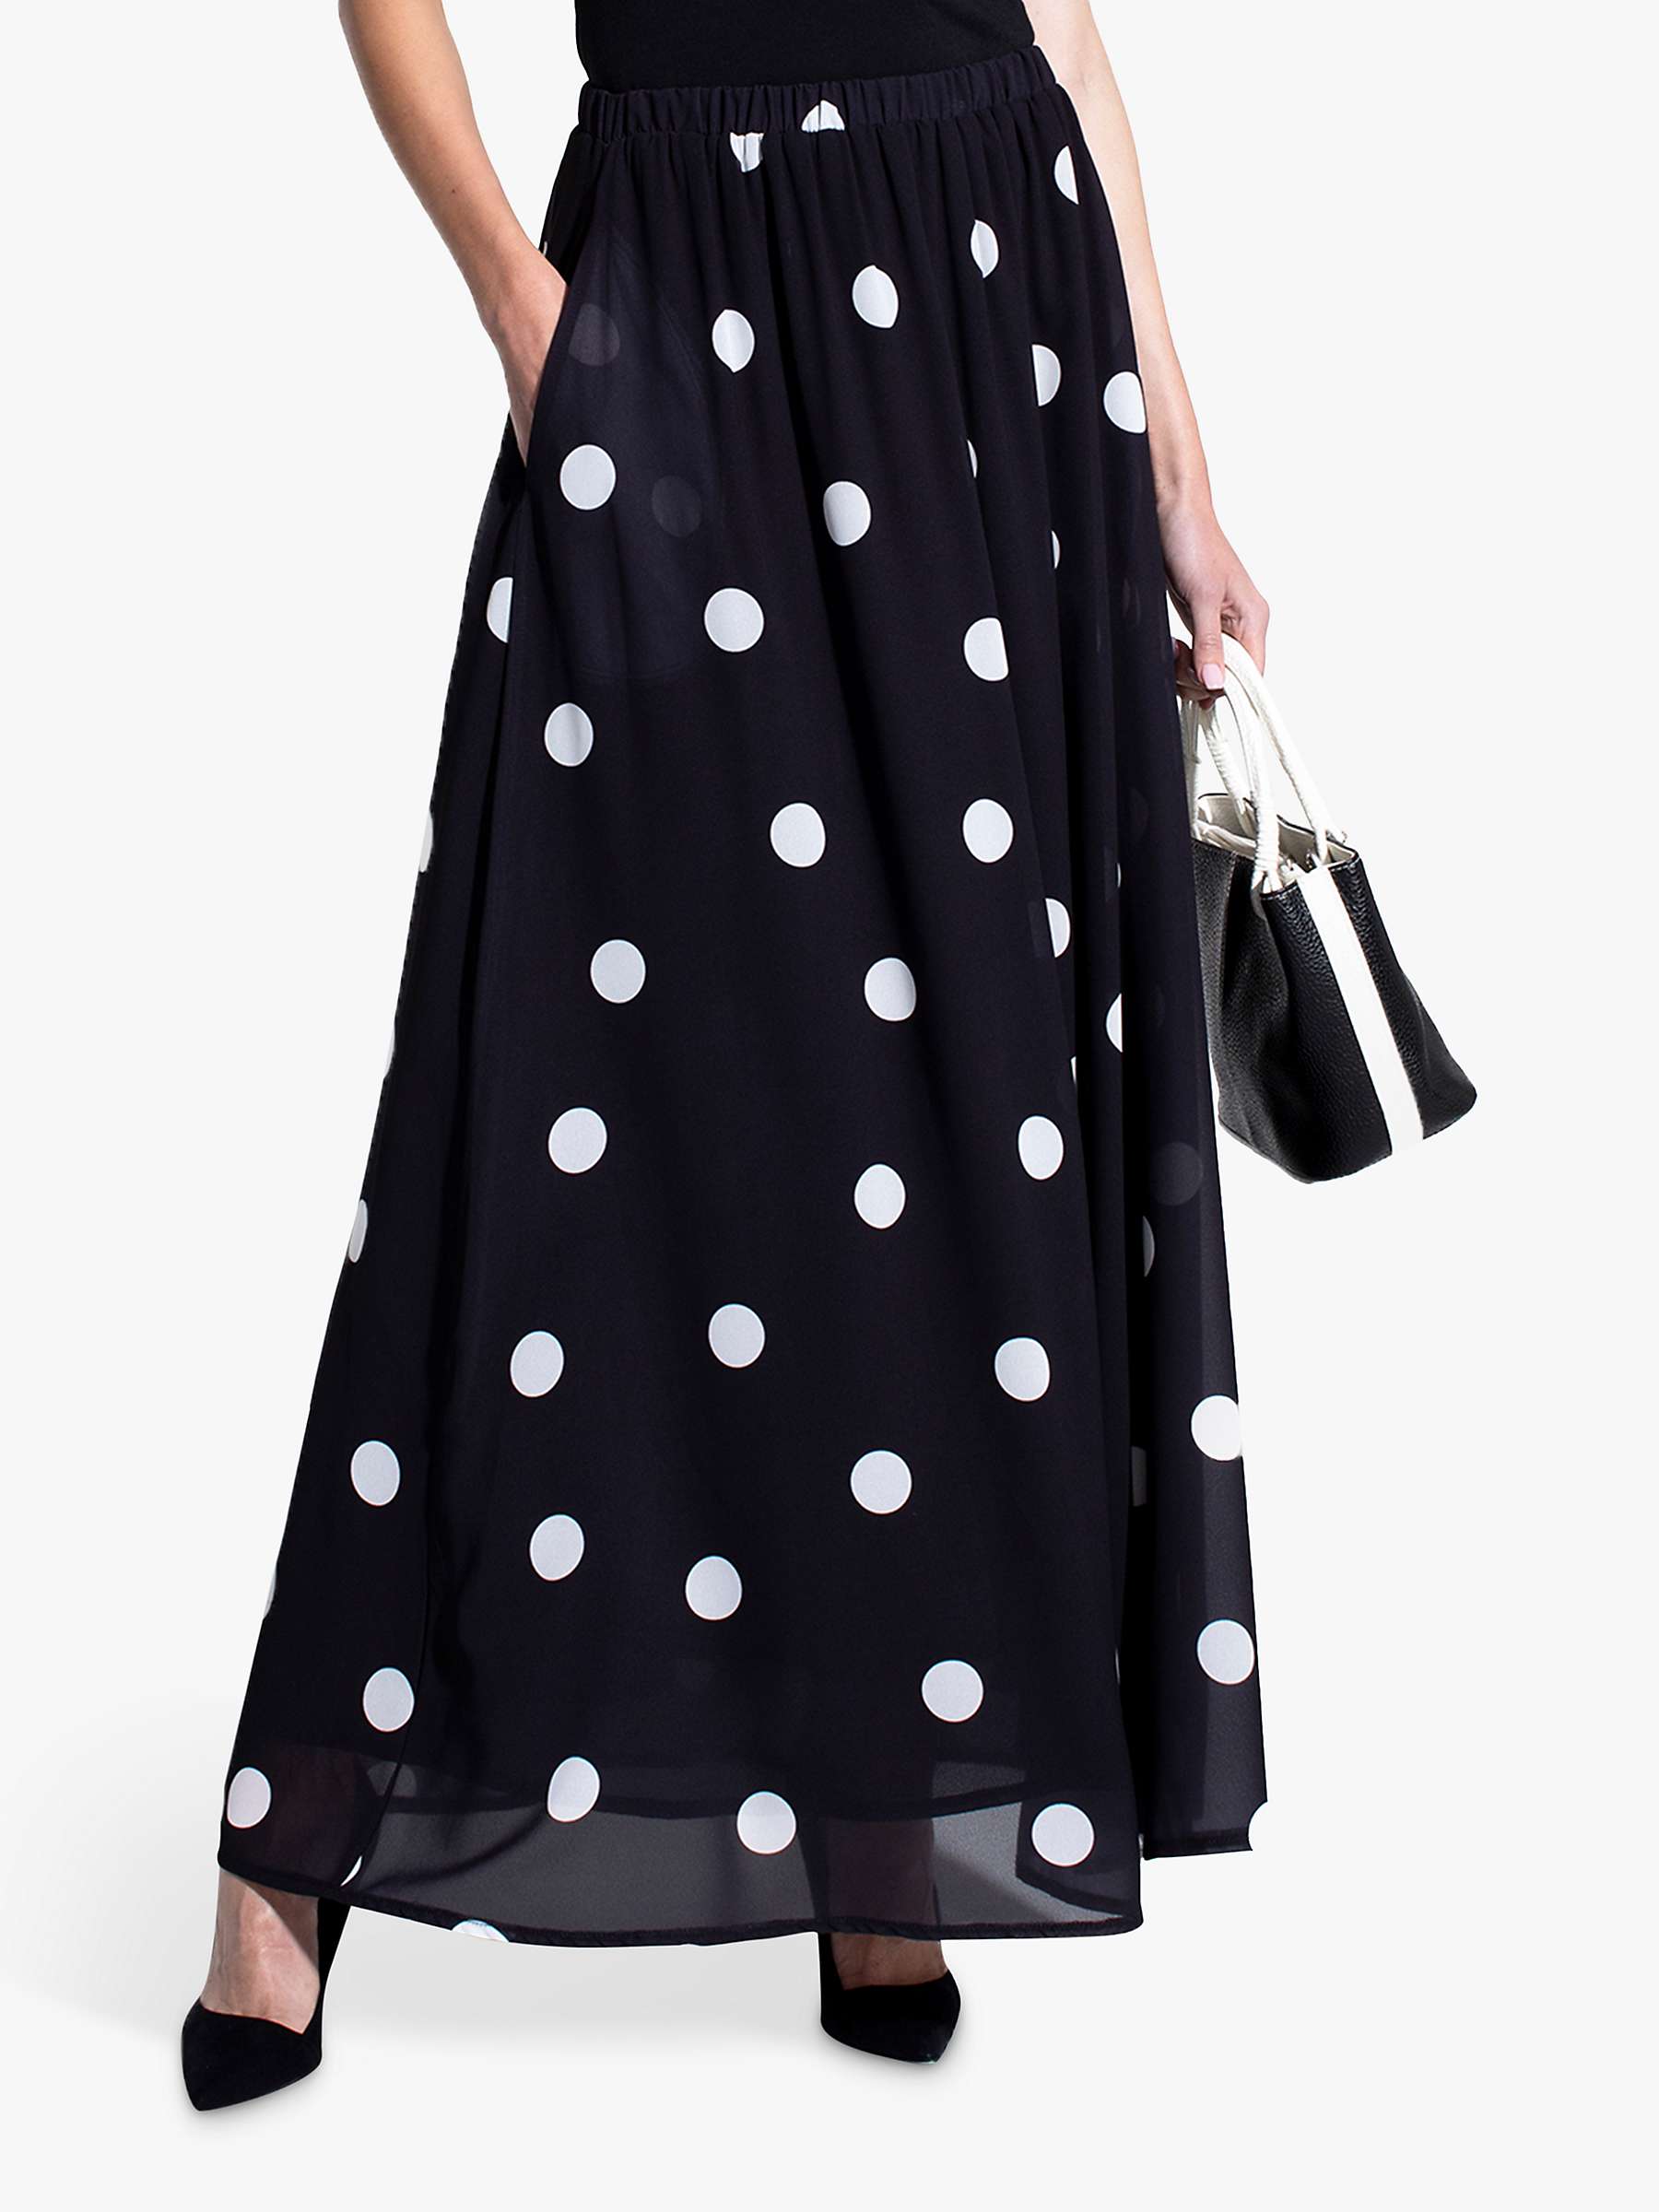 Black Polka Dot Maxi Skirt | livewire.thewire.in